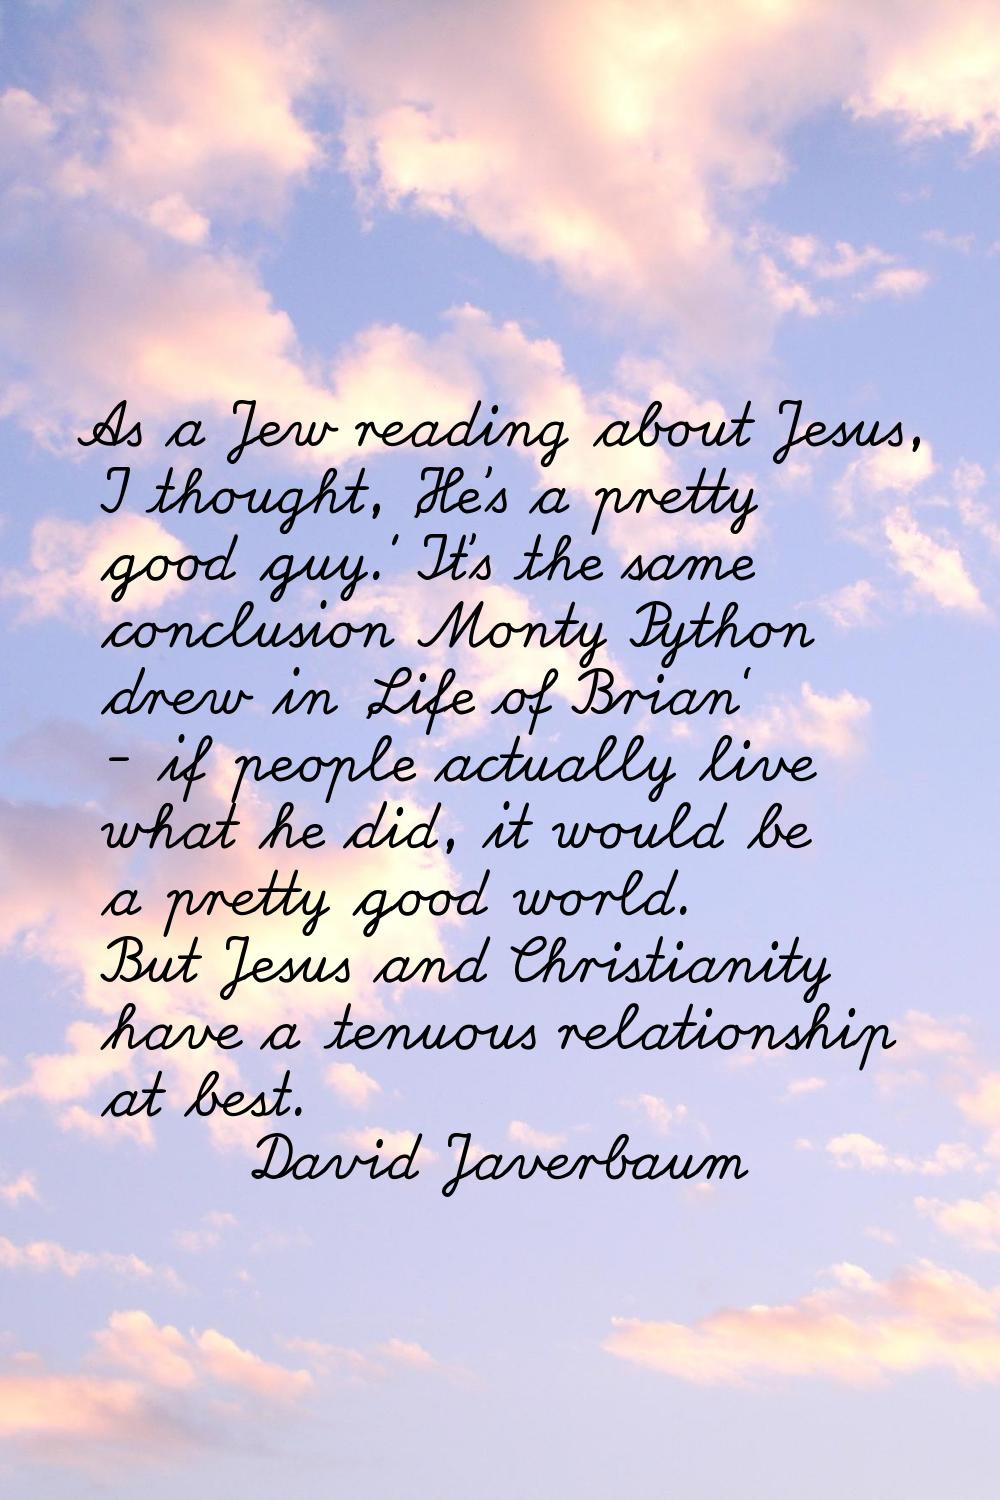 As a Jew reading about Jesus, I thought, 'He's a pretty good guy.' It's the same conclusion Monty P